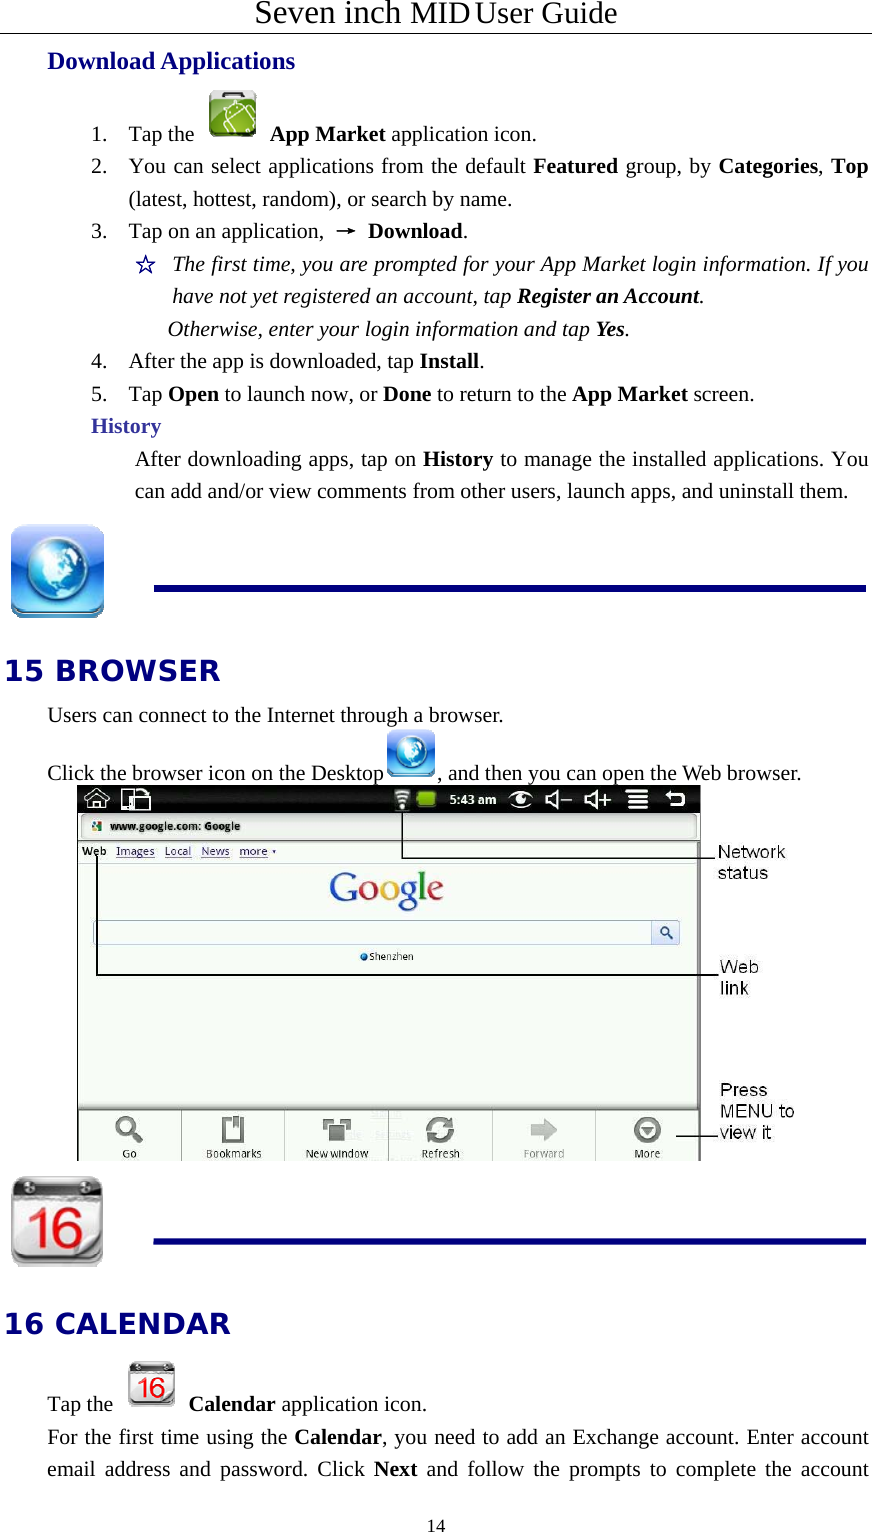 Seven inch MID User Guide  14Download Applications 1. Tap the   App Market application icon. 2. You can select applications from the default Featured group, by Categories, Top (latest, hottest, random), or search by name. 3. Tap on an application,  → Download. ☆  The first time, you are prompted for your App Market login information. If you have not yet registered an account, tap Register an Account.  Otherwise, enter your login information and tap Yes. 4. After the app is downloaded, tap Install. 5. Tap Open to launch now, or Done to return to the App Market screen. History After downloading apps, tap on History to manage the installed applications. You can add and/or view comments from other users, launch apps, and uninstall them.  15 BROWSER Users can connect to the Internet through a browser. Click the browser icon on the Desktop , and then you can open the Web browser.    16 CALENDAR Tap the   Calendar application icon. For the first time using the Calendar, you need to add an Exchange account. Enter account email address and password. Click Next and follow the prompts to complete the account 